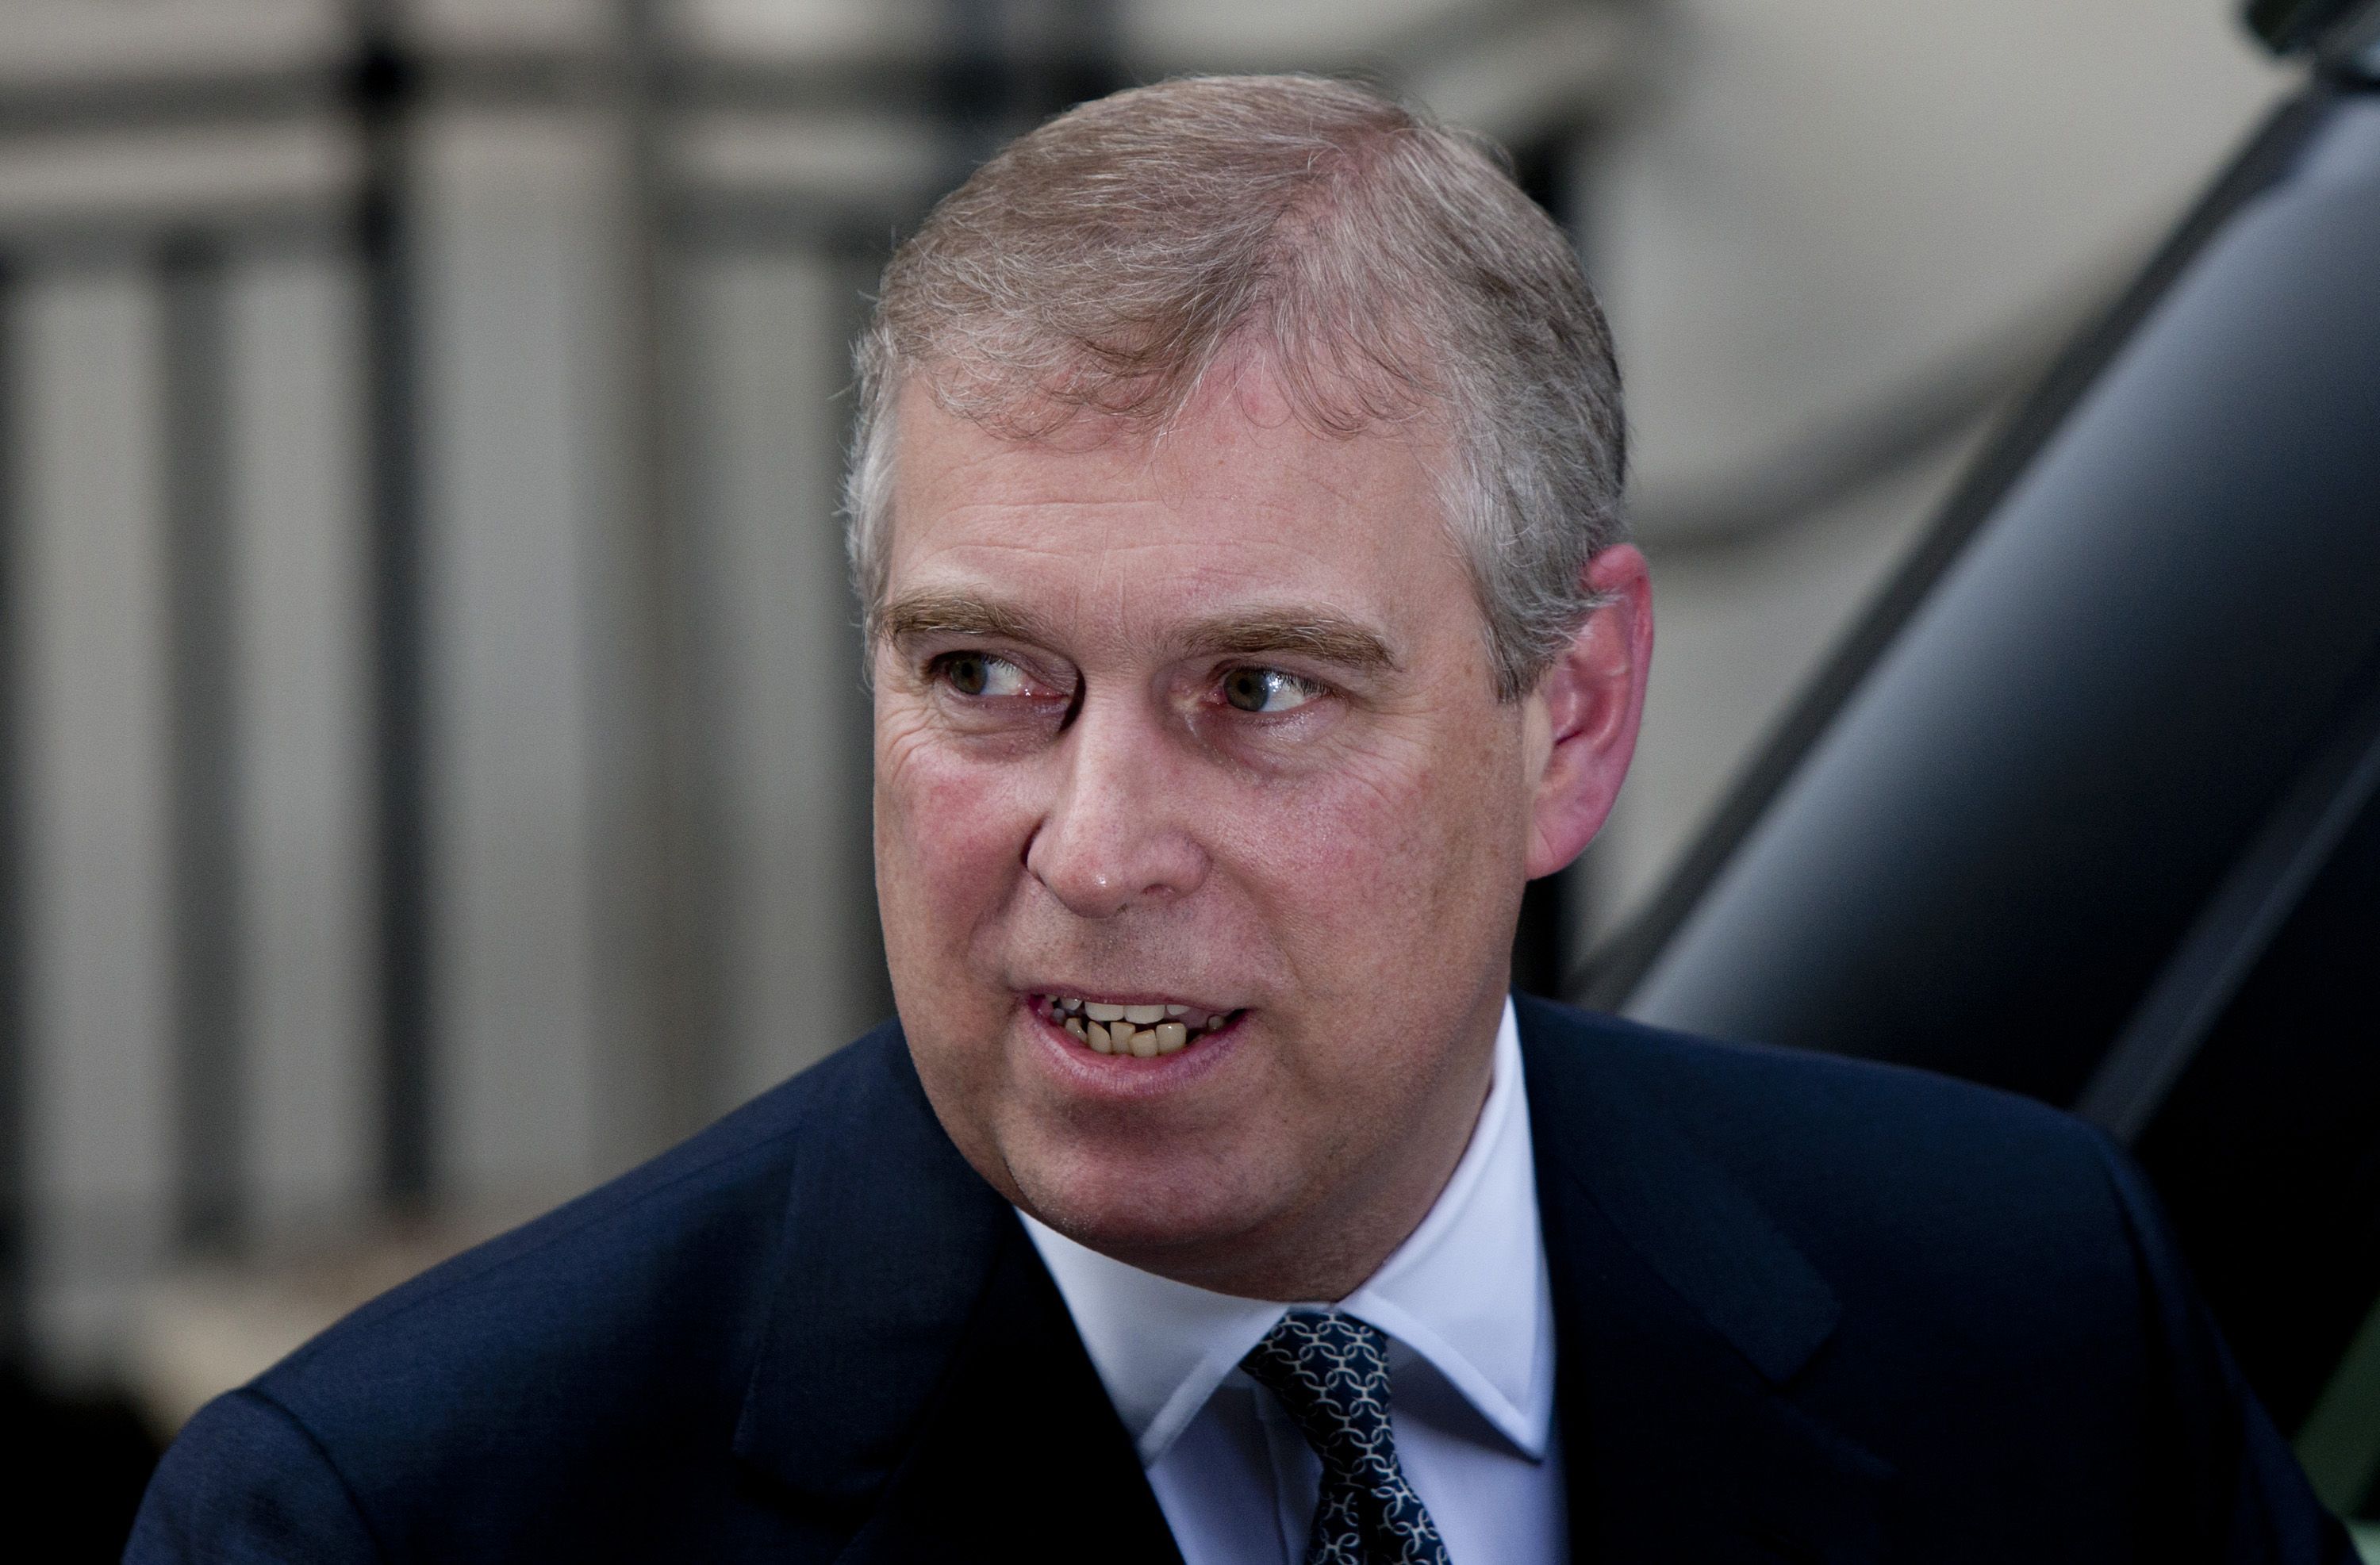 Britain's Prince Andrew accepts police apology after confrontation